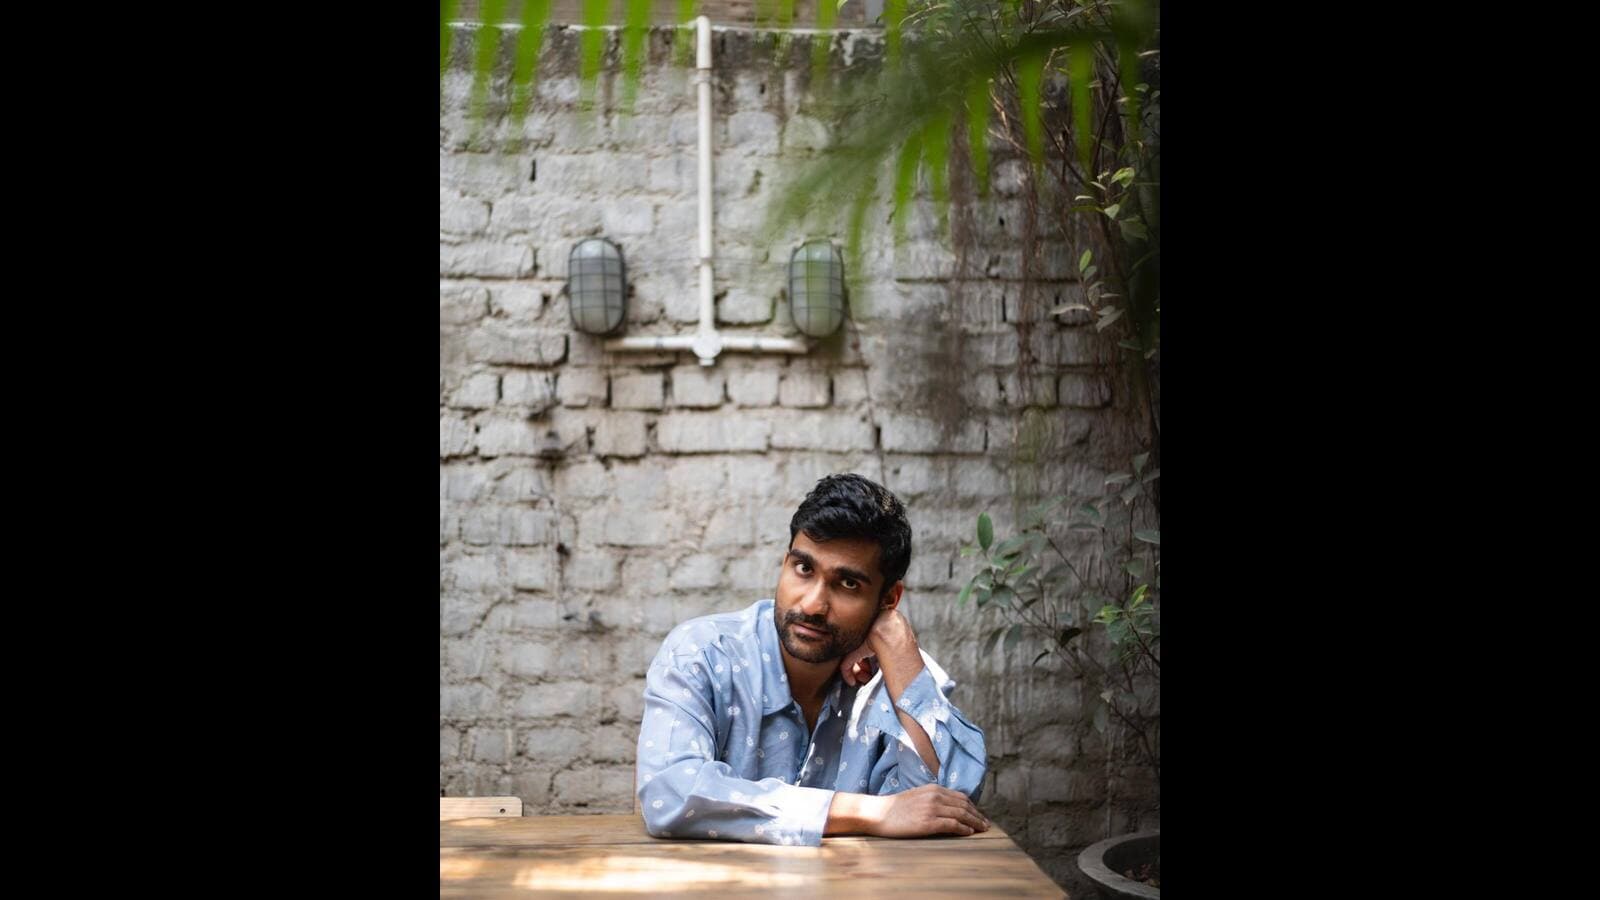 Blinds between indie music and Bollywood are thinning for good: Prateek Kuhad